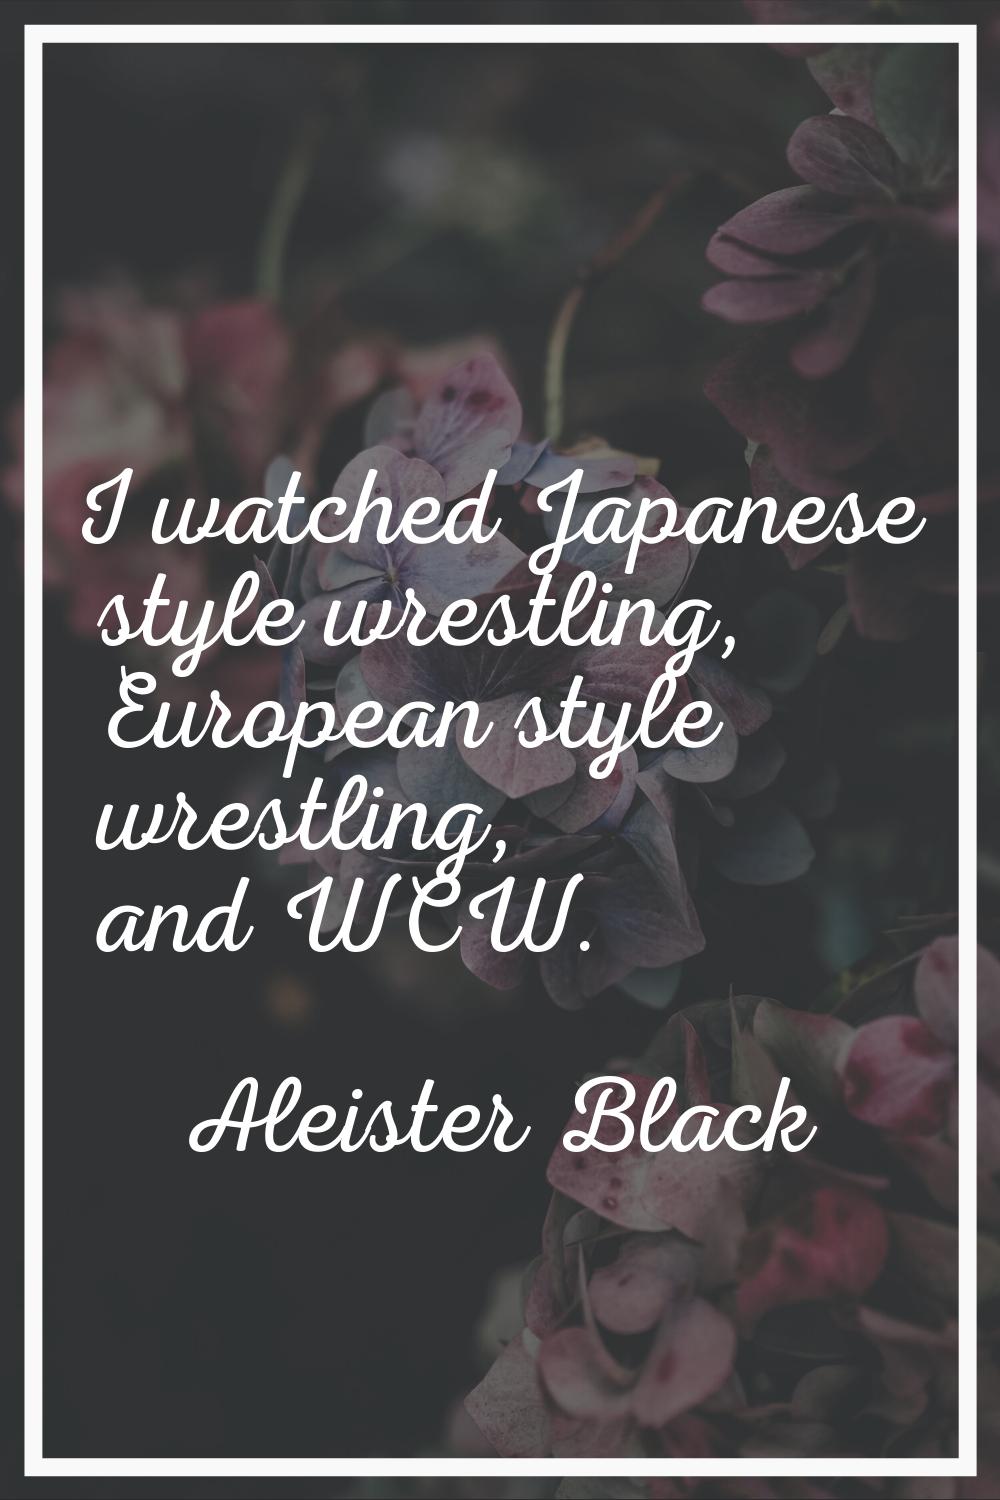 I watched Japanese style wrestling, European style wrestling, and WCW.